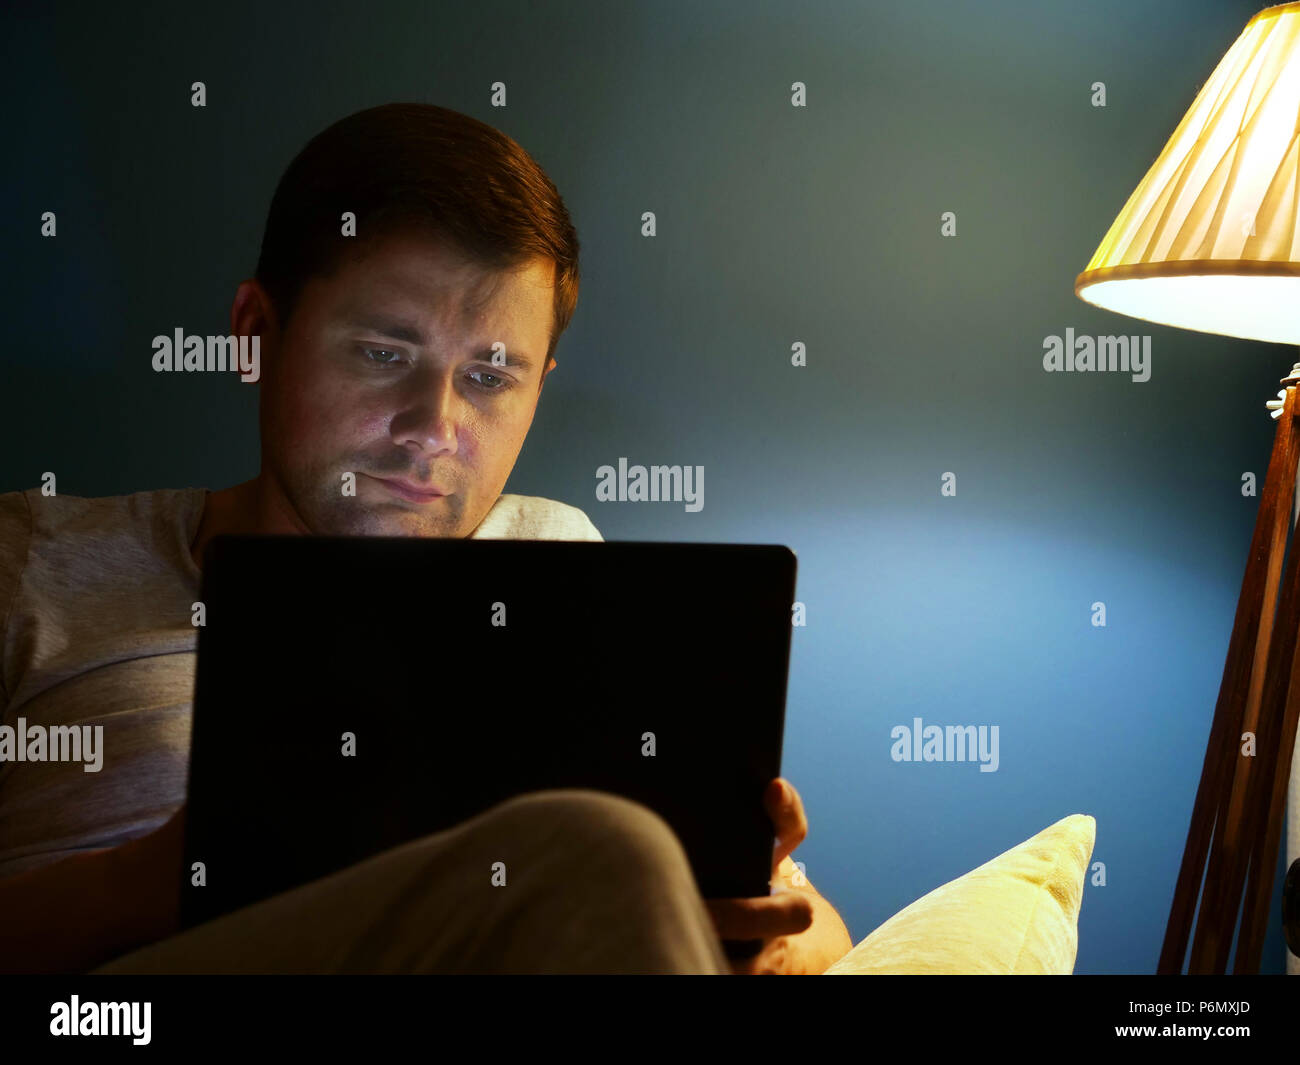 Man on a sofa using laptop. Evening at home. Stock Photo